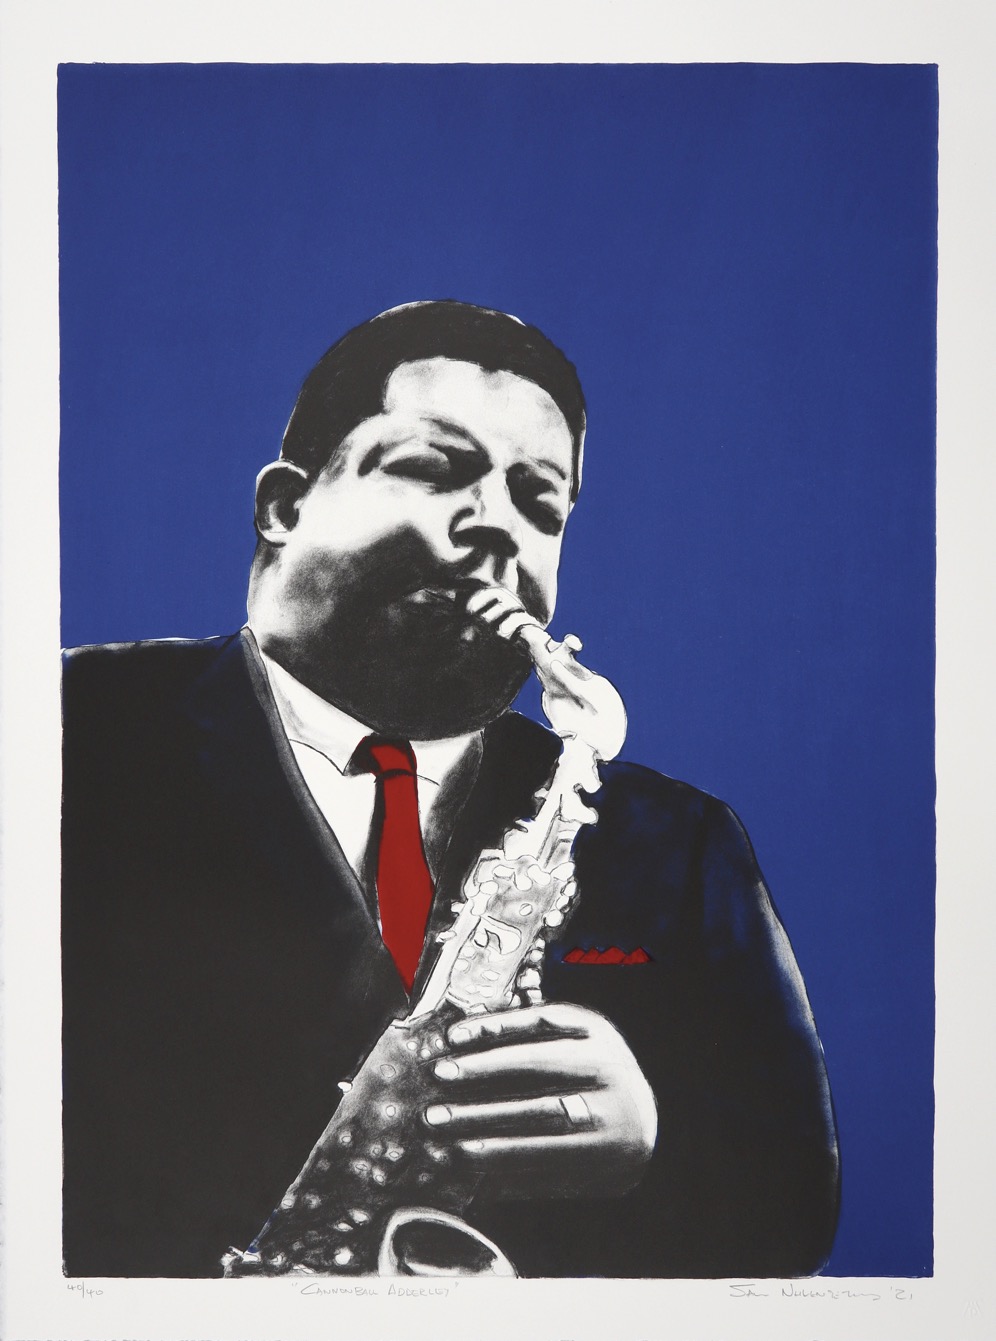 Hand-drawn print of Cannonball Adderley playing a saxophone focussing on the upper body and his left hand.